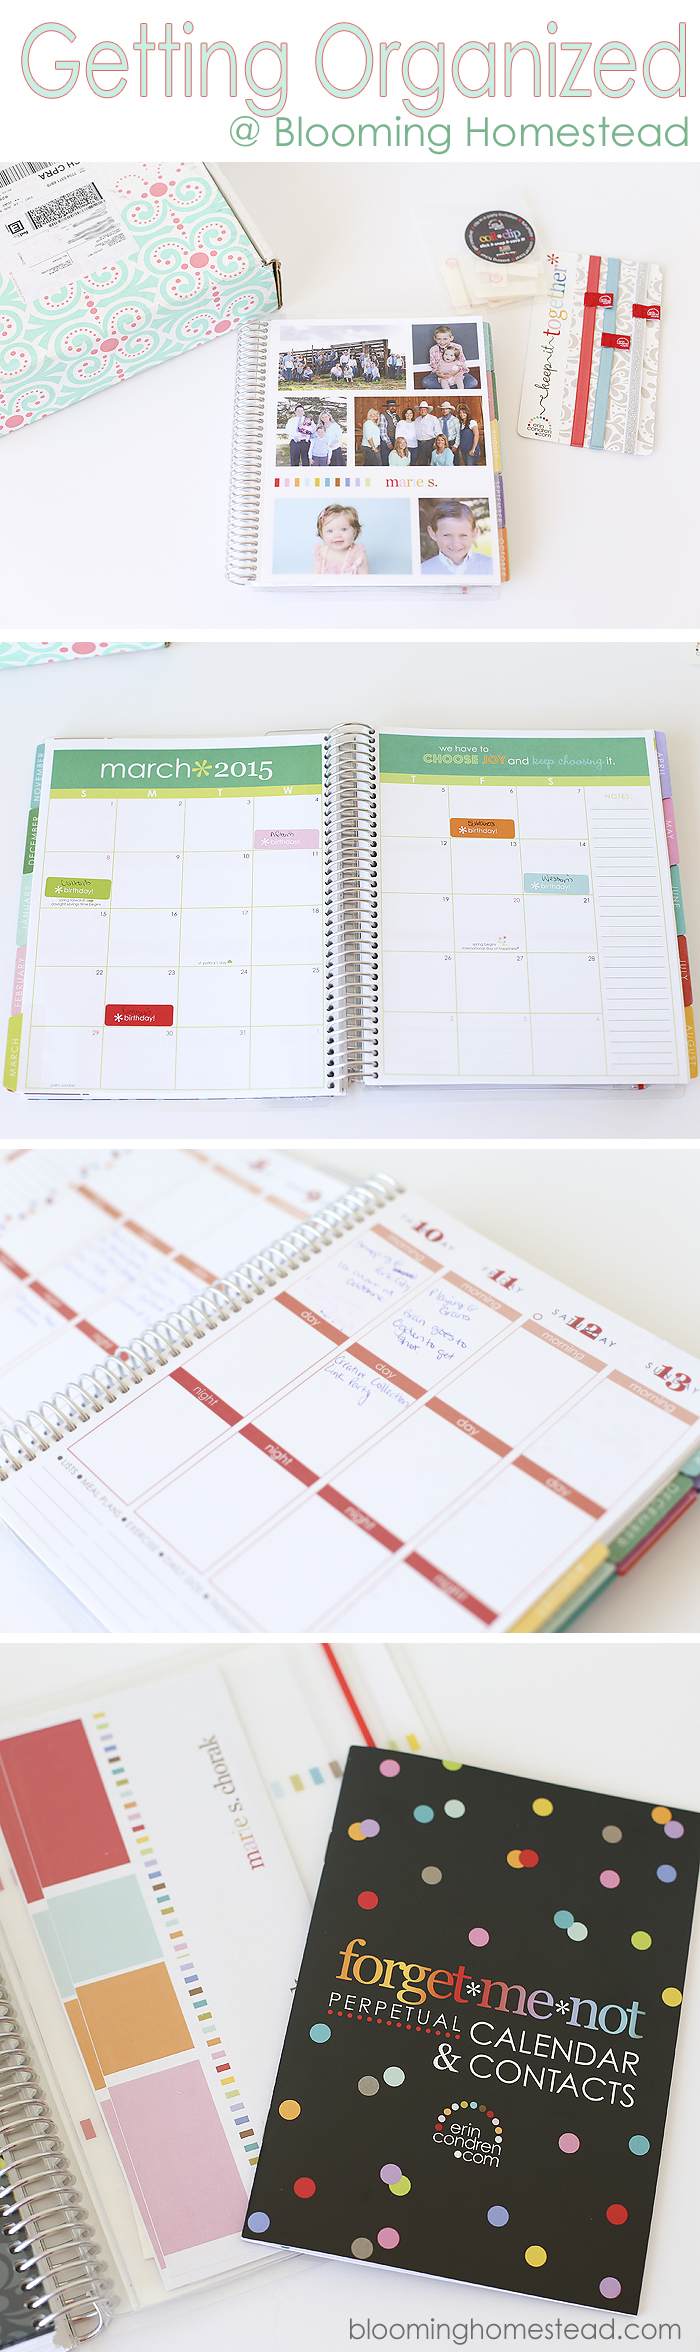 Getting Organized Planner at Blooming Homestead